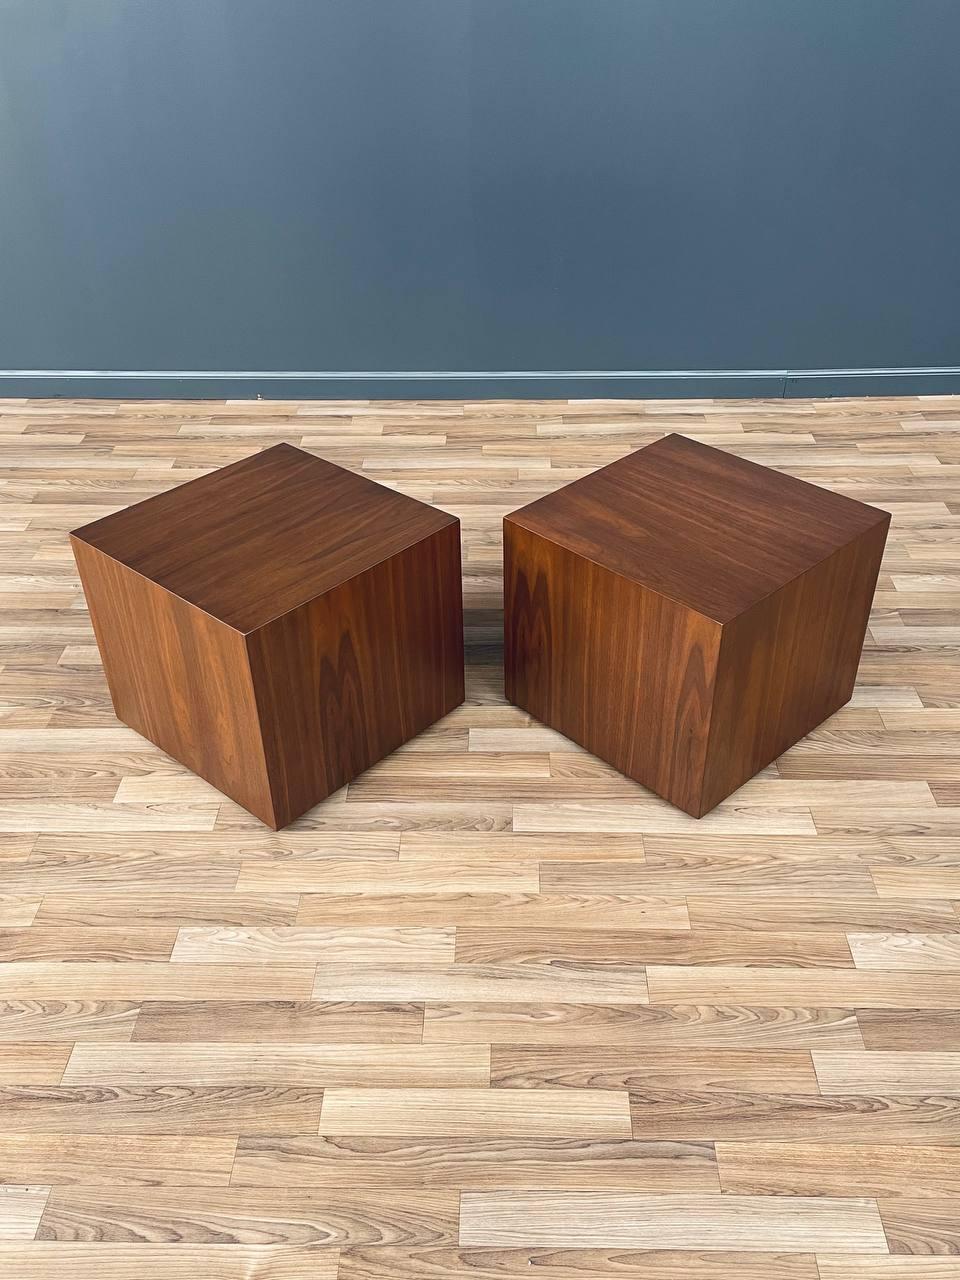 American Pair of Mid-Century Modern Walnut Pedestal Cube Side Tables For Sale